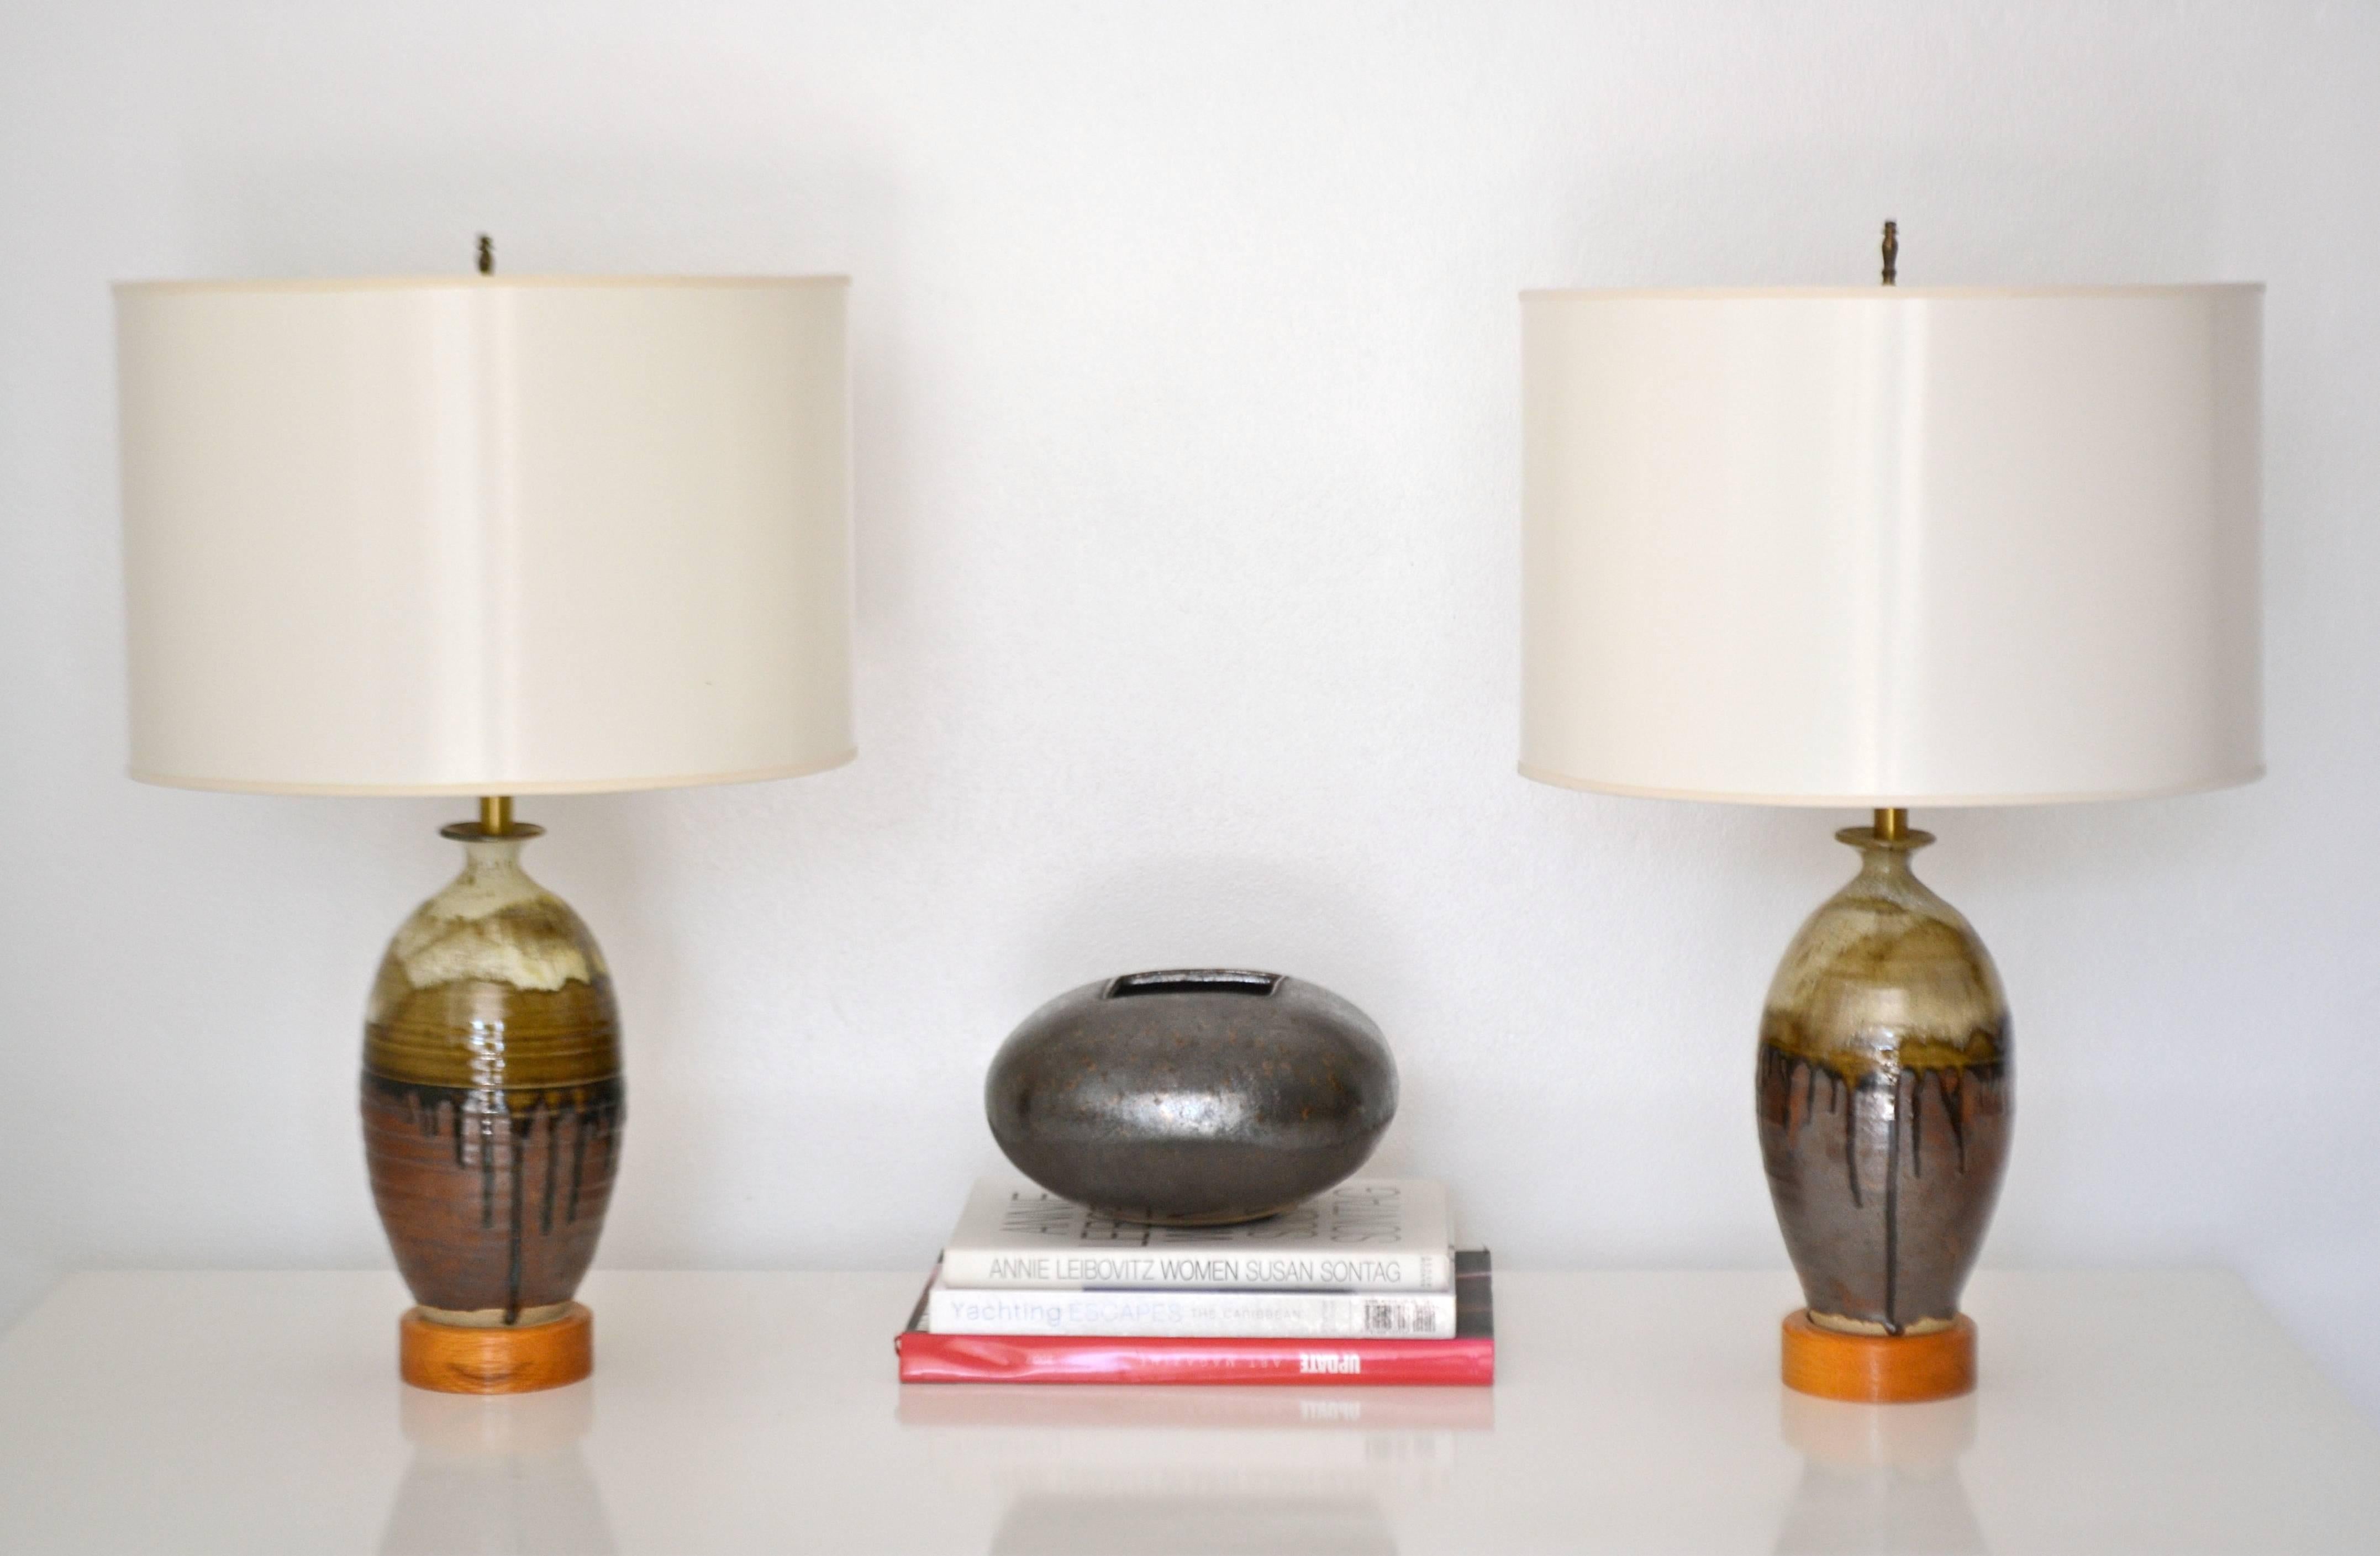 Striking pair of midcentury jar form ceramic table lamps, circa 1950s-1960s. These artisan thrown lamps are drip glazed in natural earth tones mounted in turned wood bases and wired with brass fittings. Shades not included.
Measurements: The height